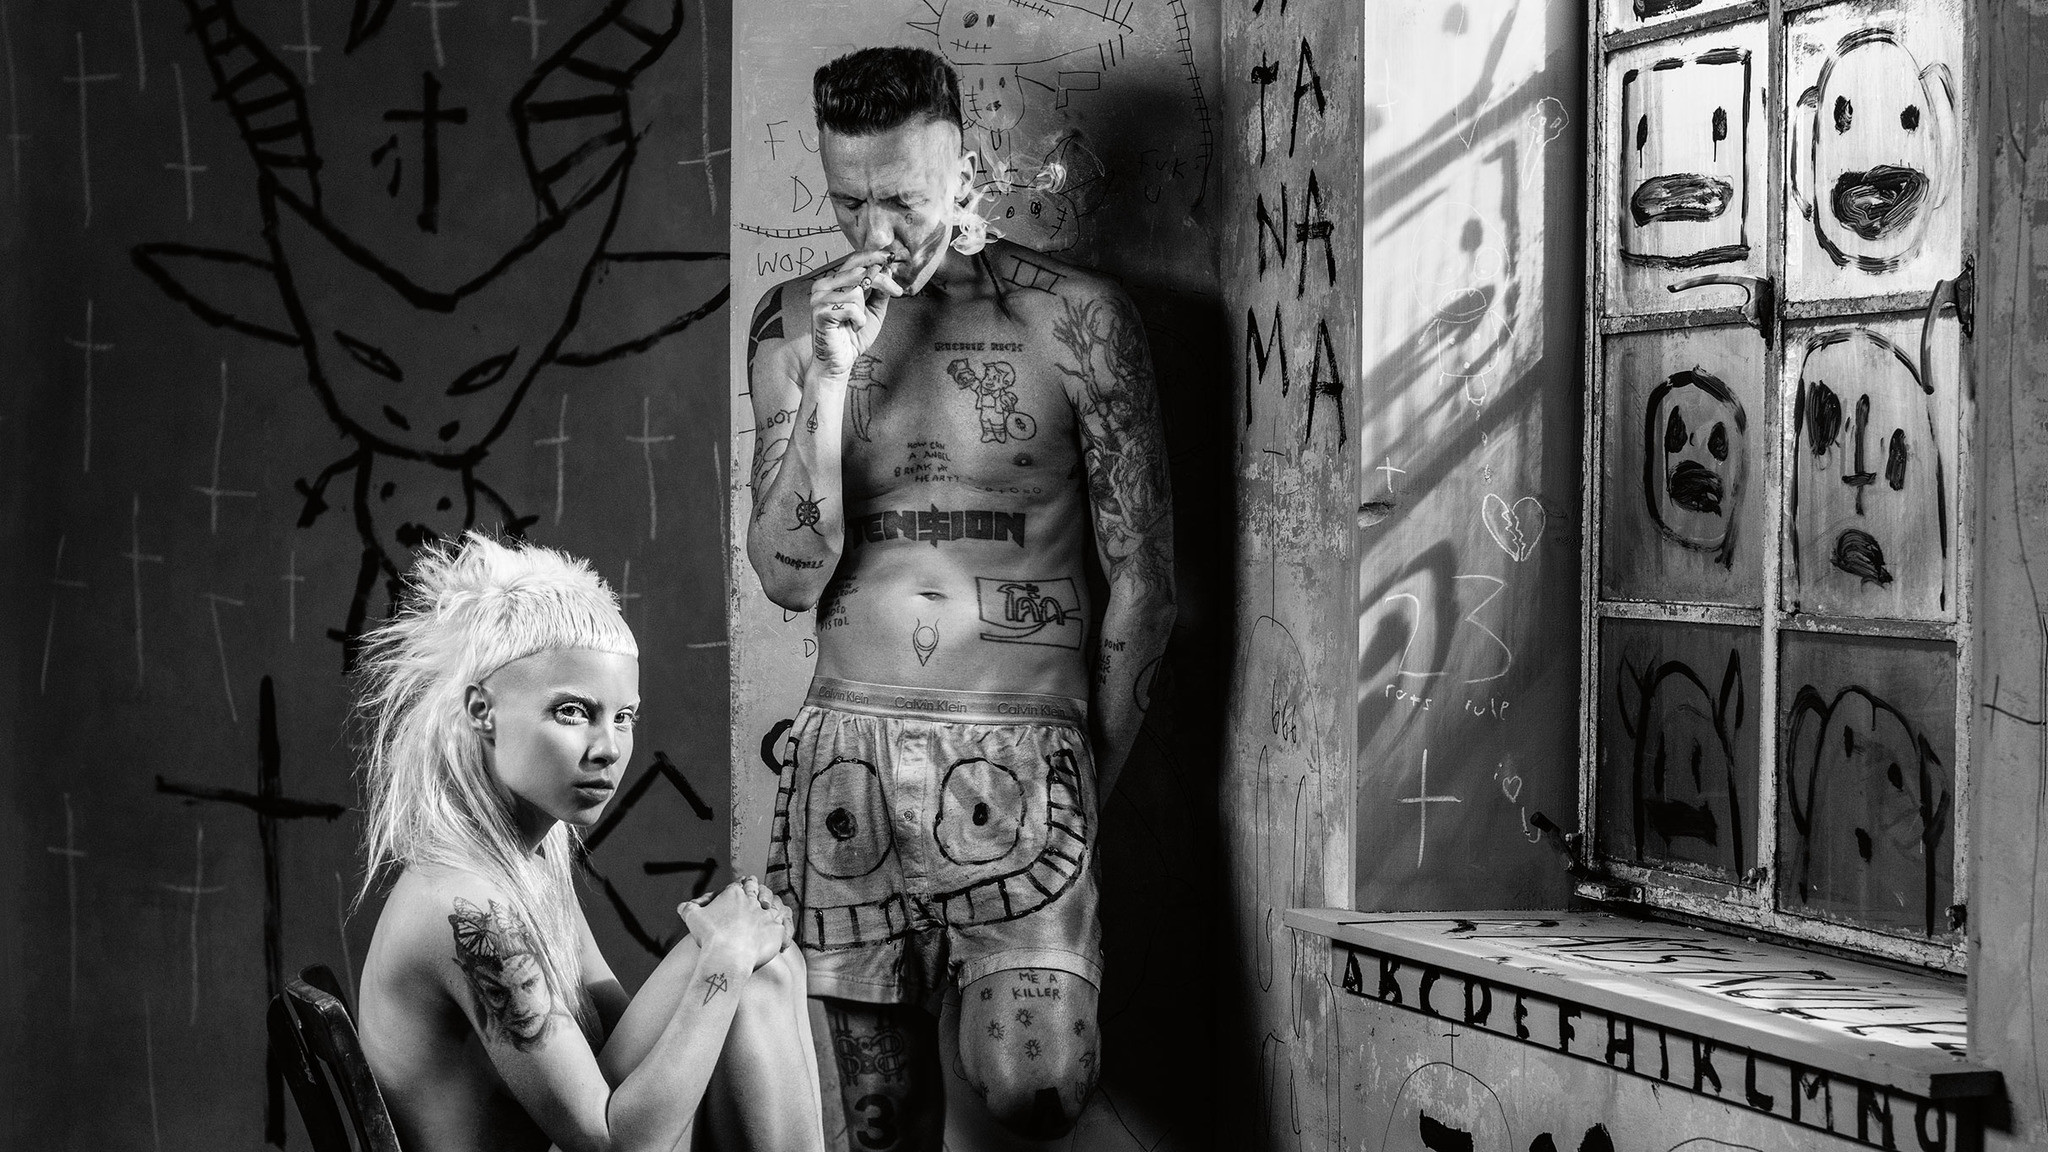 die antwoord wallpaper,black and white,tattoo,monochrome,monochrome photography,human